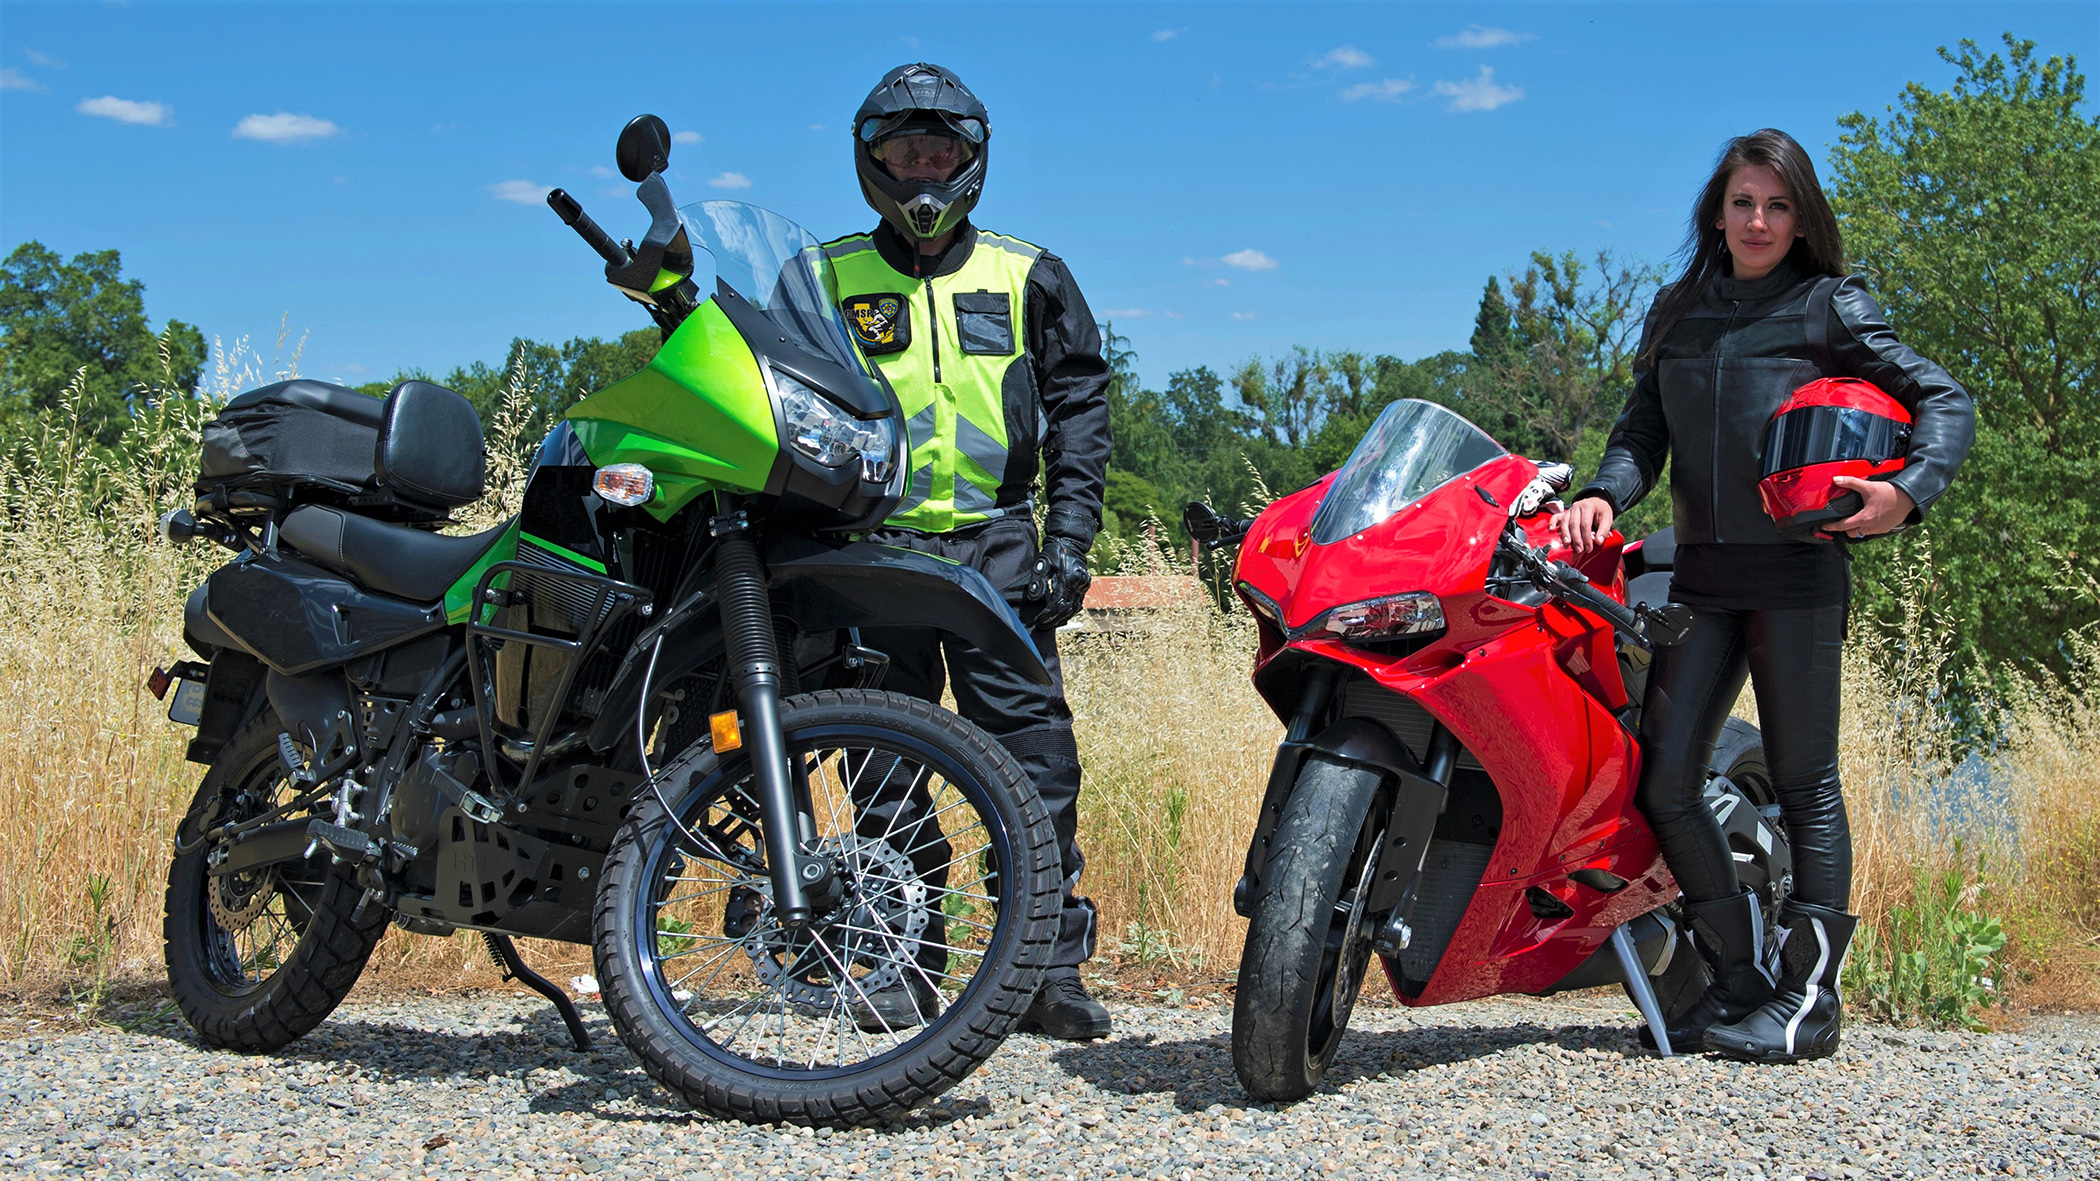 Motorcycle Safety Course Chico California | Reviewmotors.co